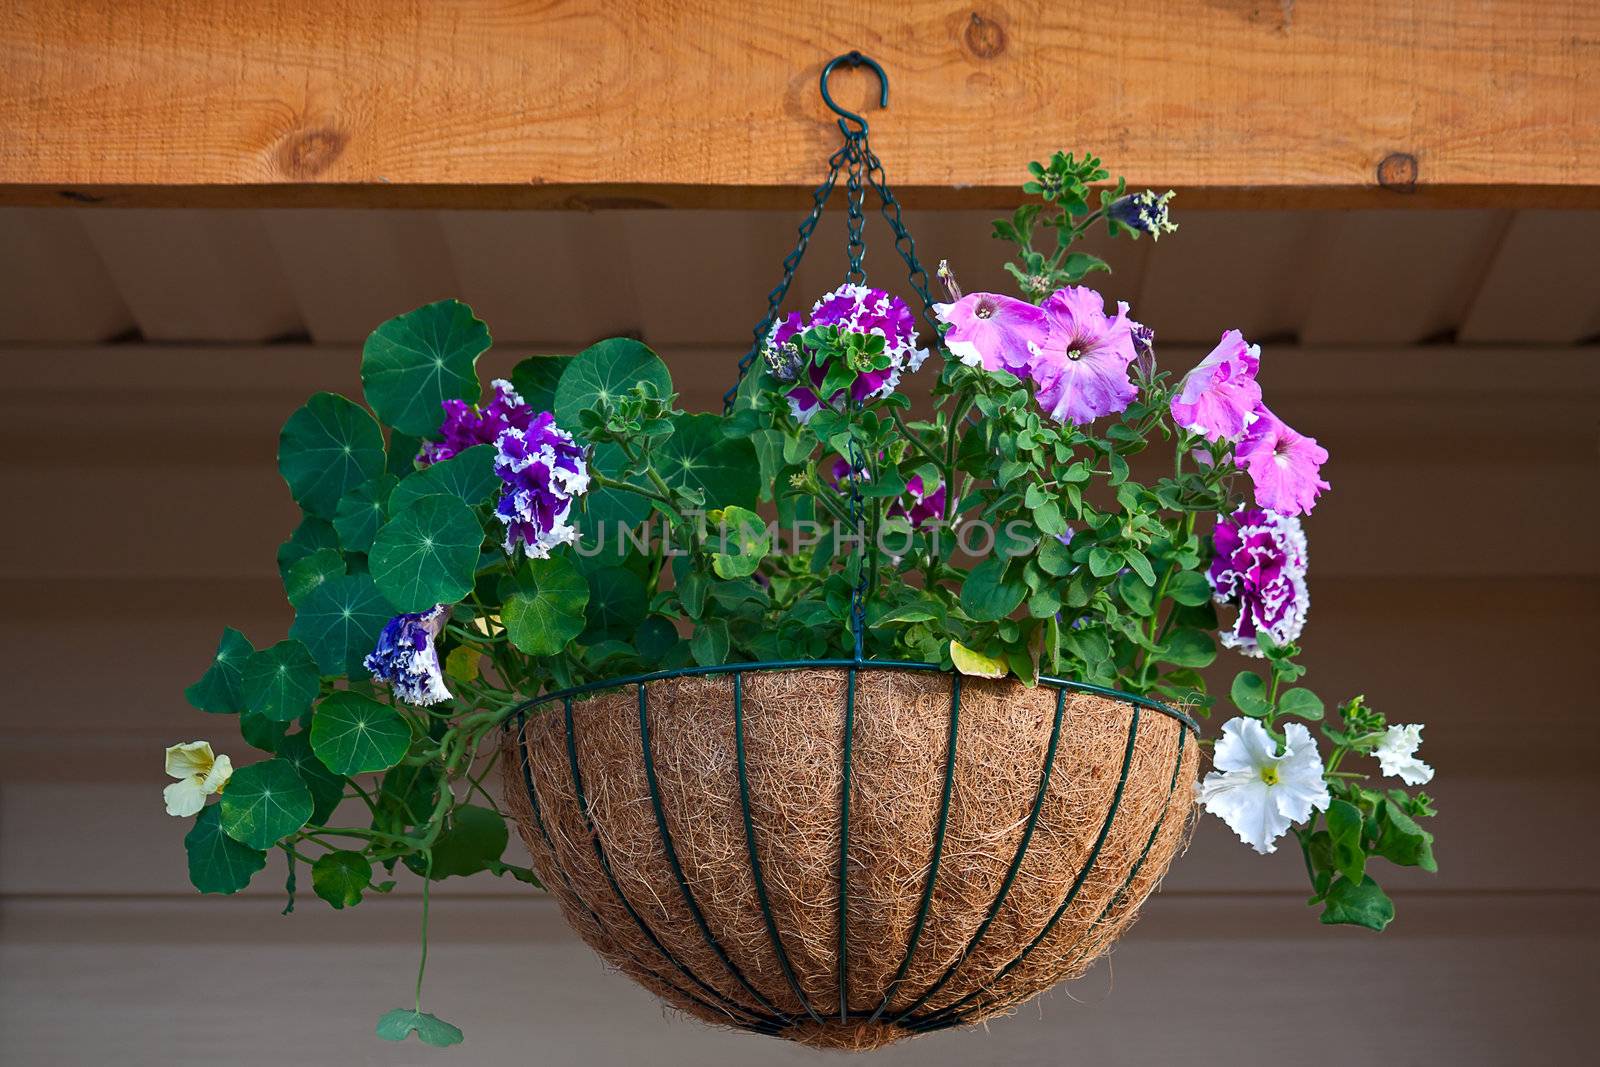 Colorful petunia in  hanging pot against  wall.